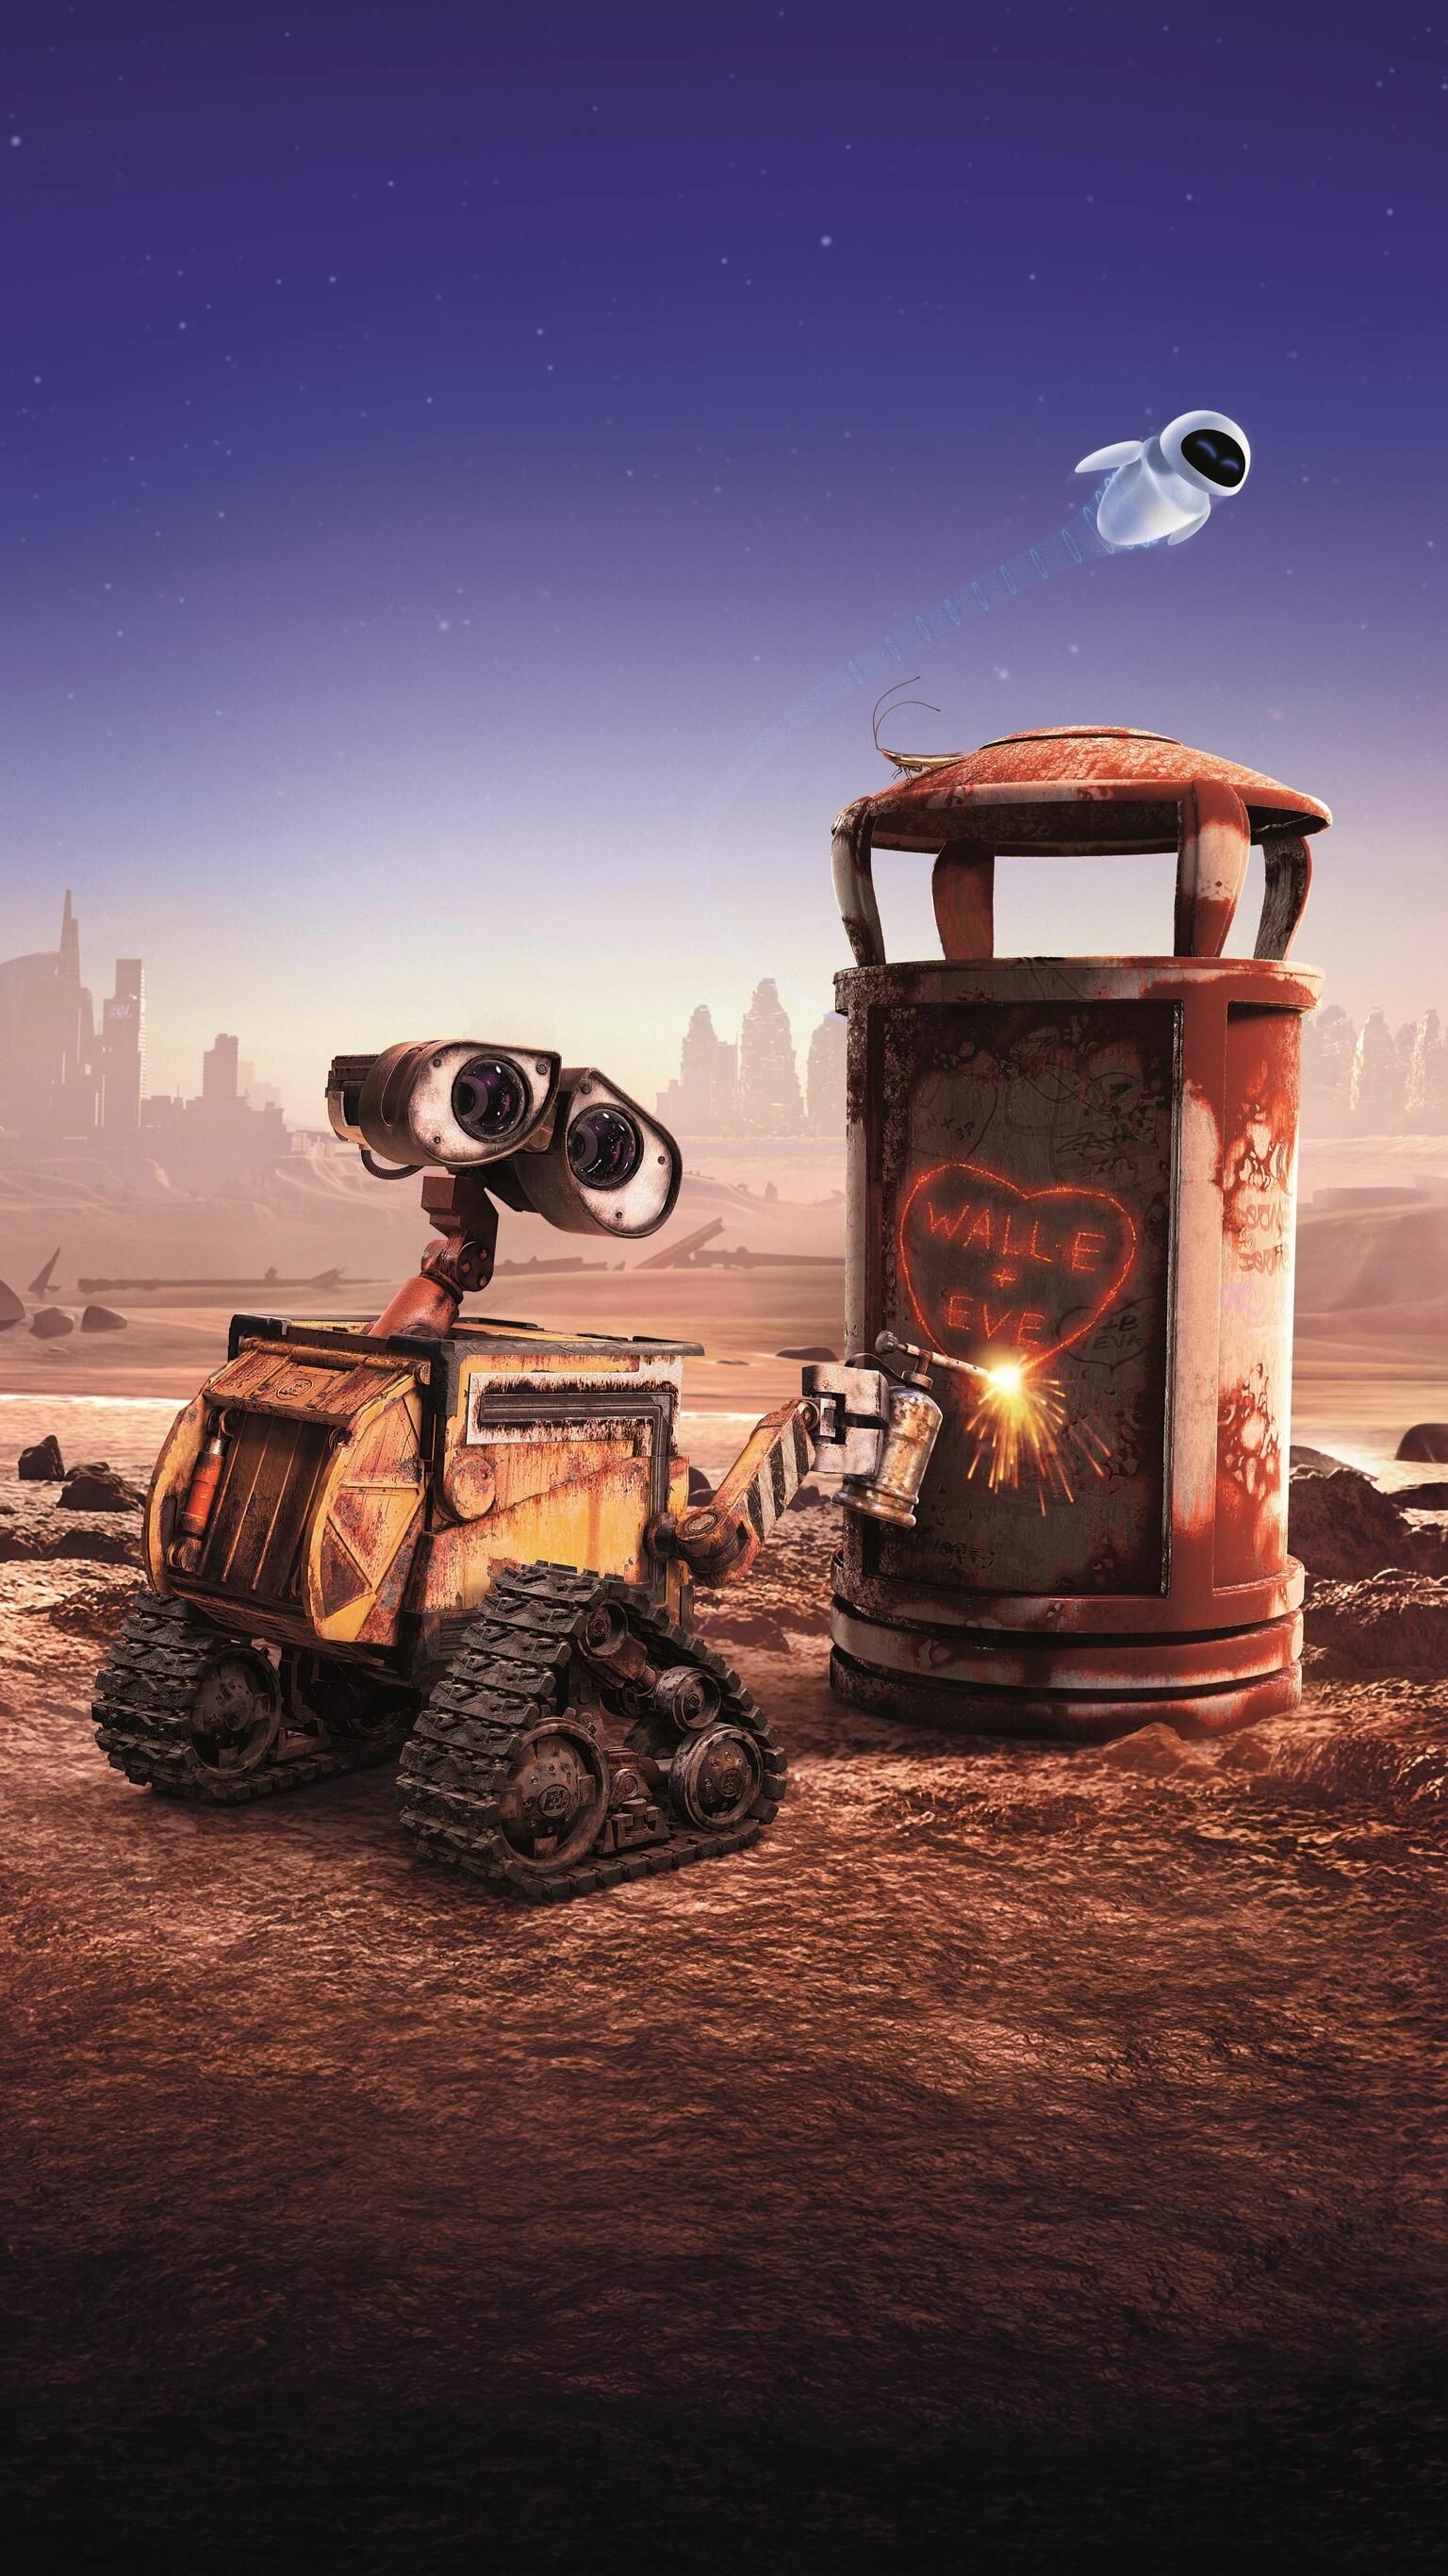 WALL·E: It won the 2008 Golden Globe Award for Best Animated Feature Film. 1540x2740 HD Background.